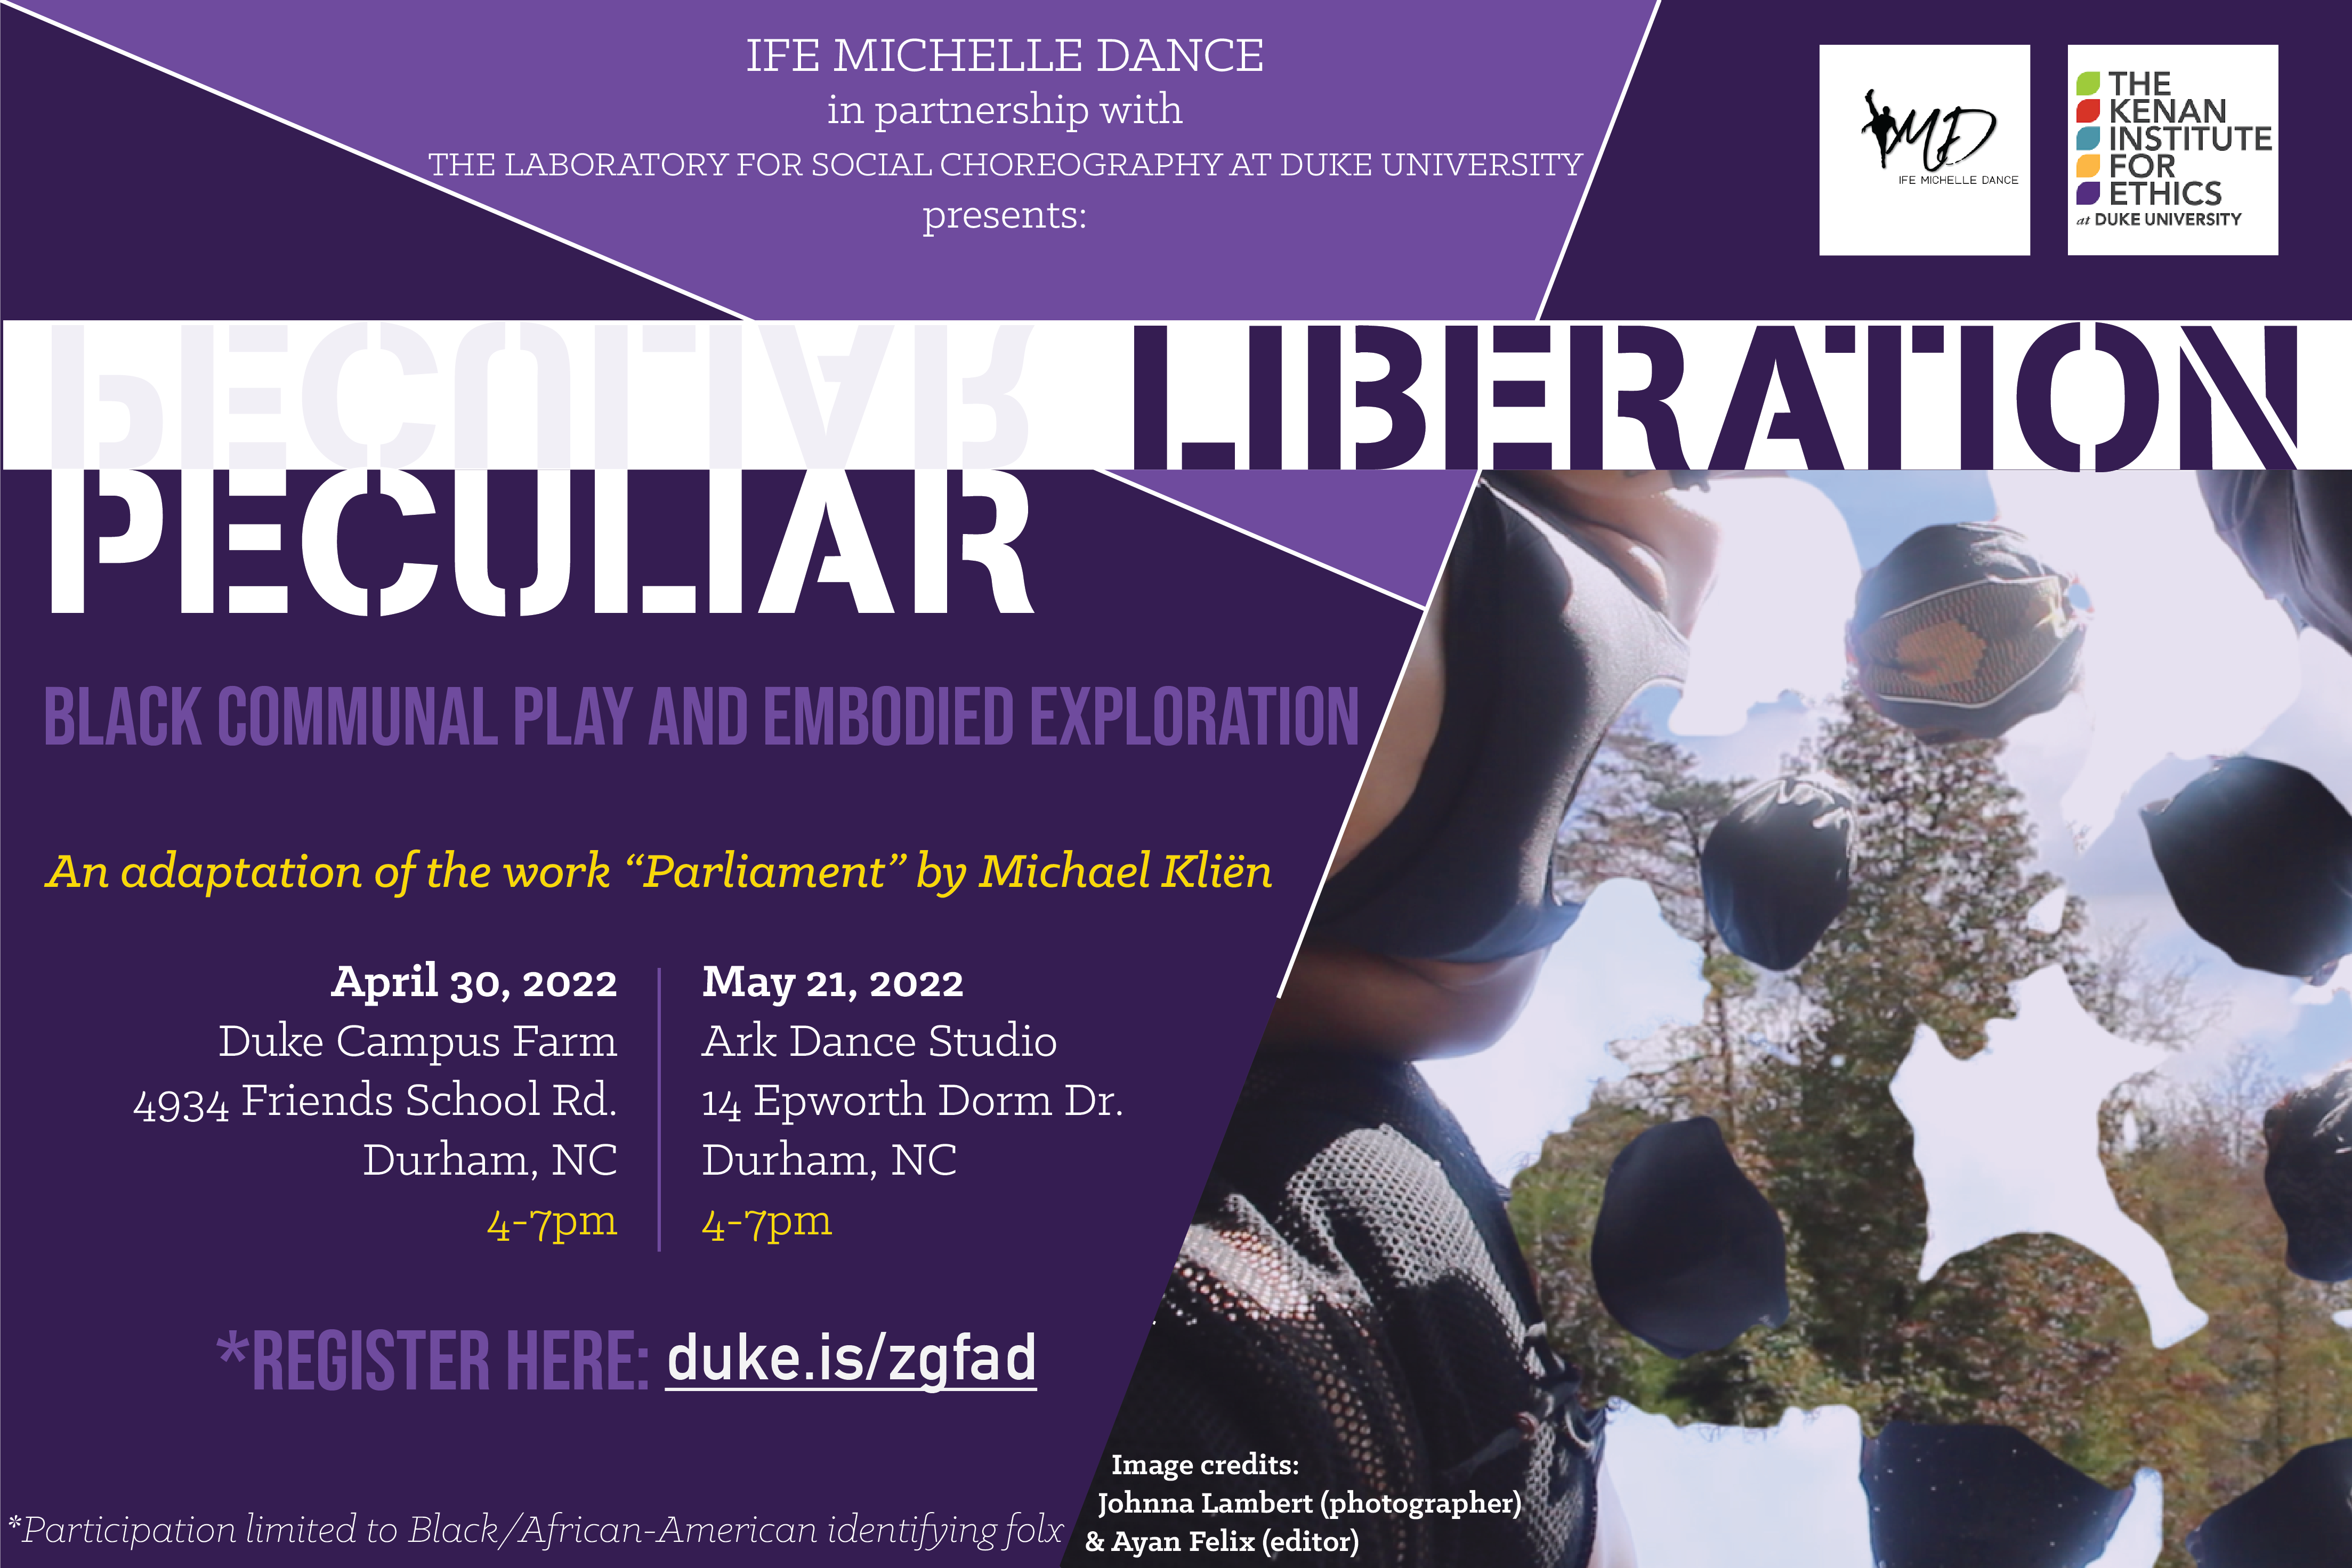 Ife Michelle Dance in partnership with the Laboratory for Social Choreography presents &amp;quot;Pecular Liberation&amp;quot; Black communal play and embodied exploration. An adaptation of the work &amp;quot;Parliament&amp;quot; by Michael Kliën. April 30, Duke Campus Farm, 4934 Friends School Rd, Durham, NC, 4-7pm. May 21, Ark Dance Studio, 14 Epworth Ln, Durham, NC, 4-7pm. Register here: duke.is/zgfad. *Participation limited to Black/African-American identifying folx.